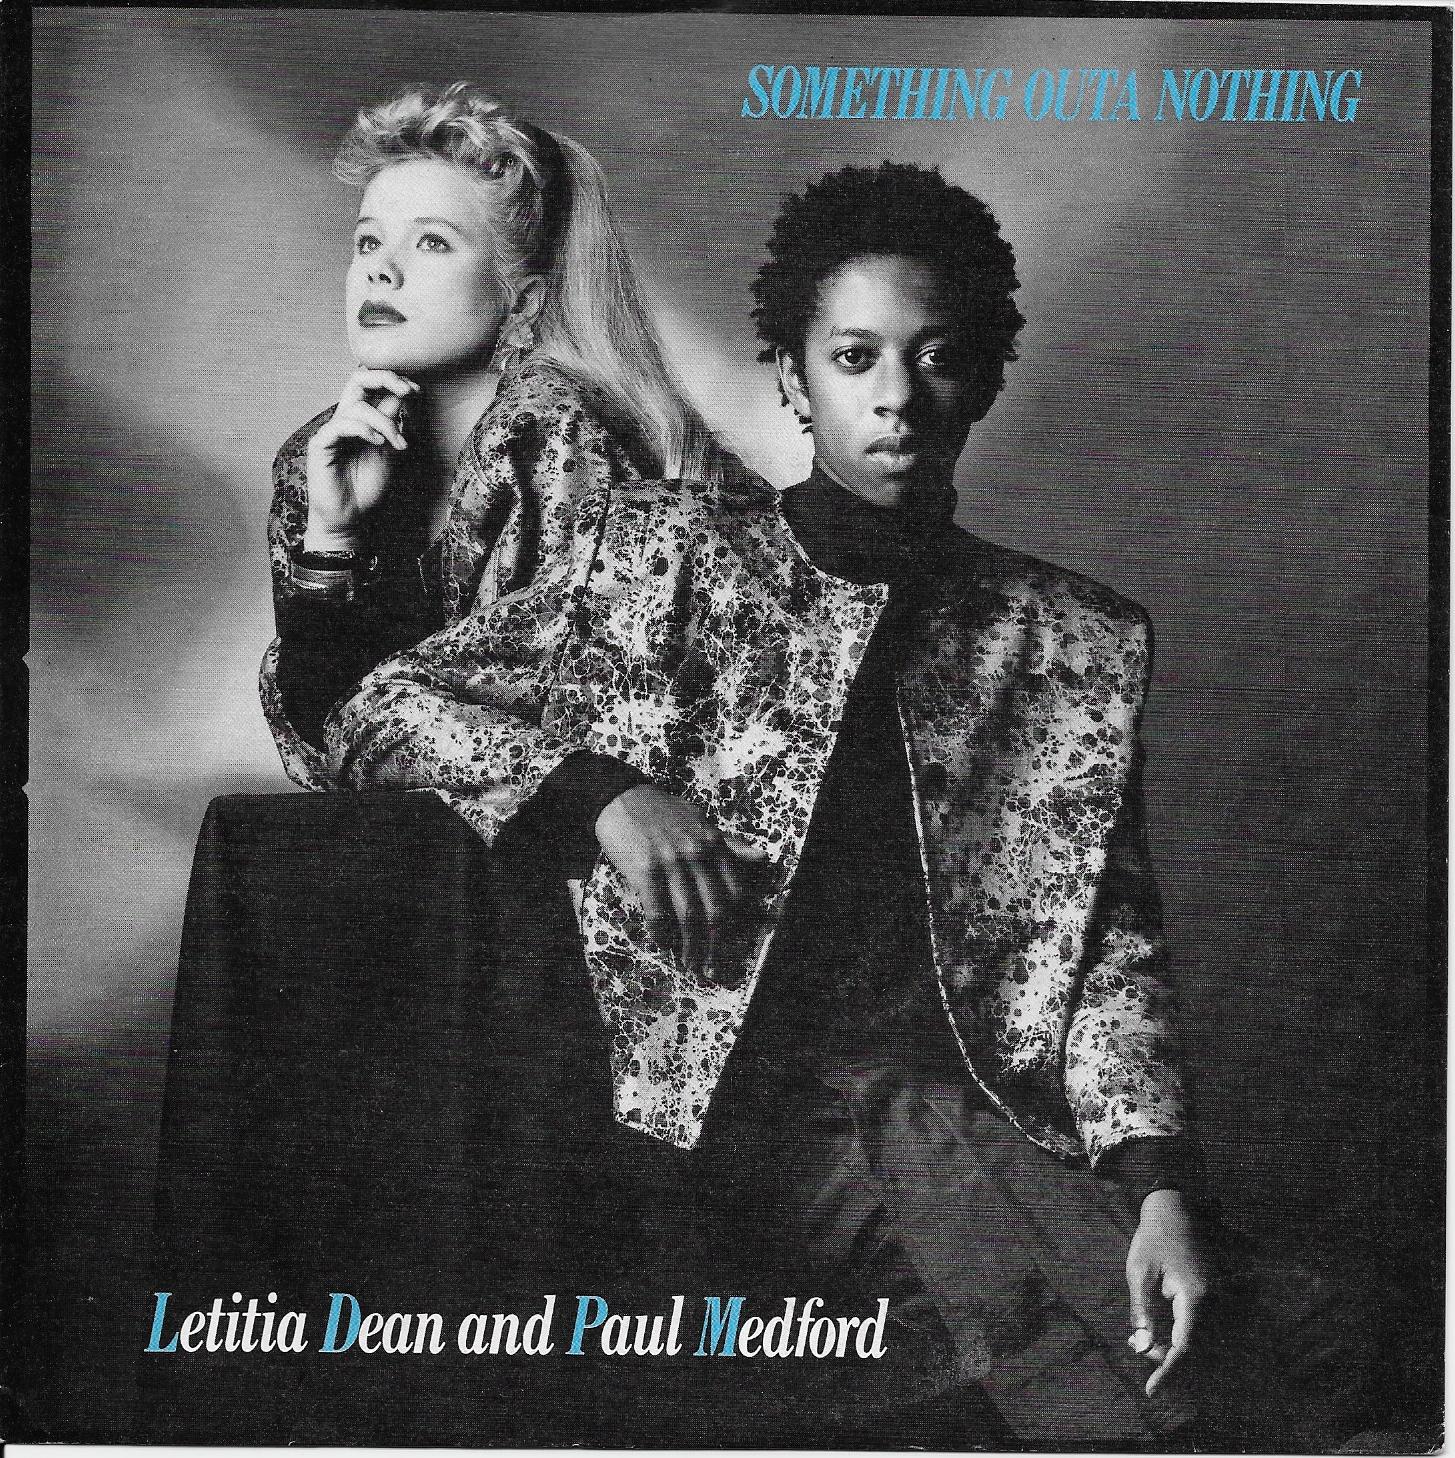 Picture of RESL 203 Something outa nothing (EastEnders) by artist Simon Wicks / Simon May 
 / Letitia Dean and Paul Medford from the BBC records and Tapes library